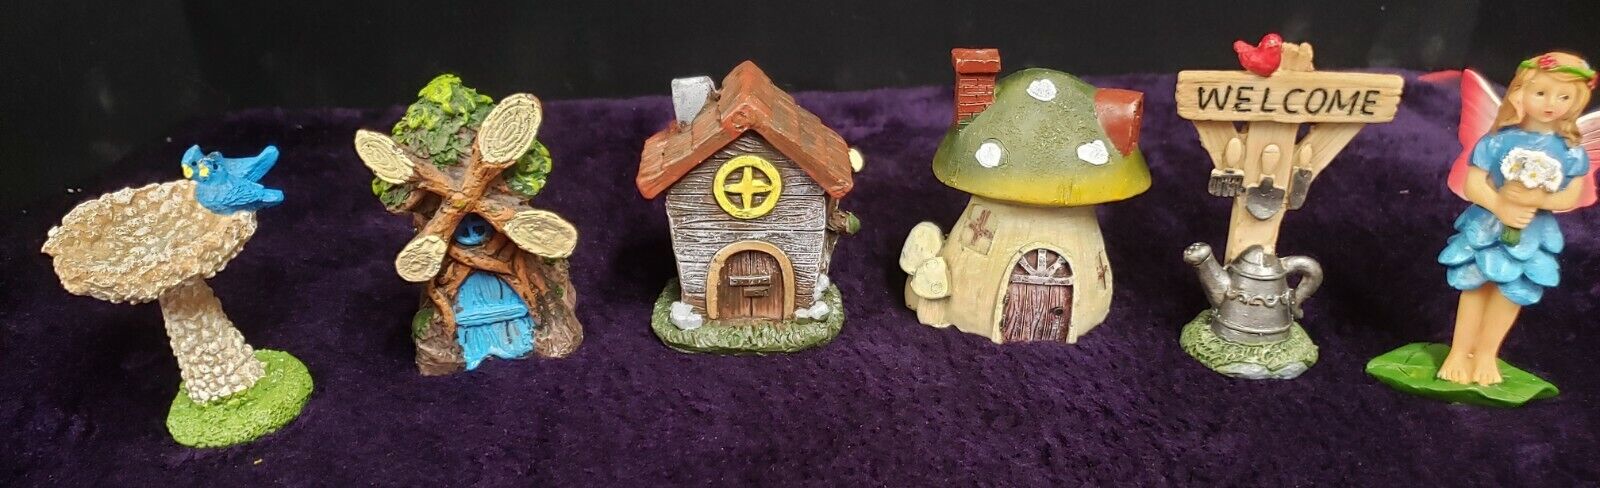 Resin Miniature Collection (Fiery, windmill, house, mushroom house & 2 more)